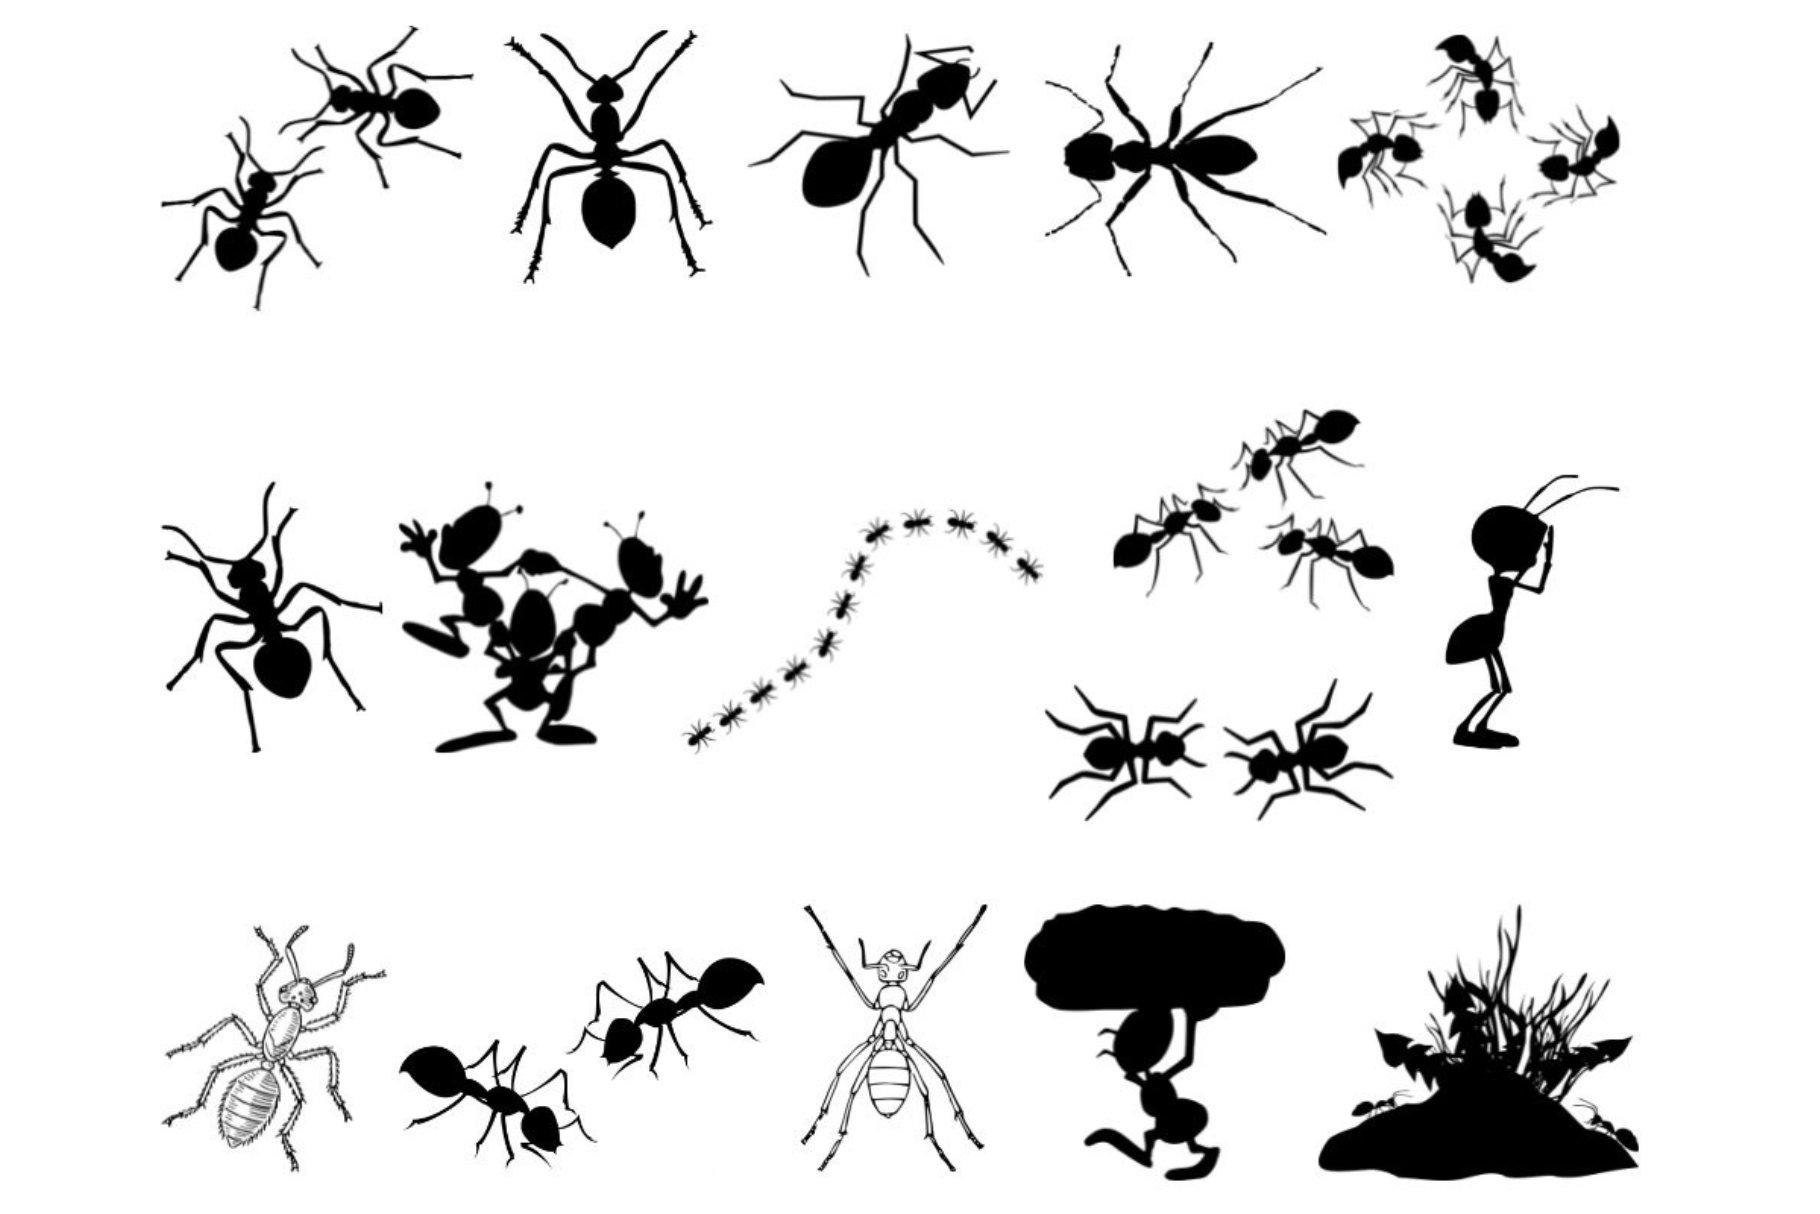 Ant Silhouette cover image.